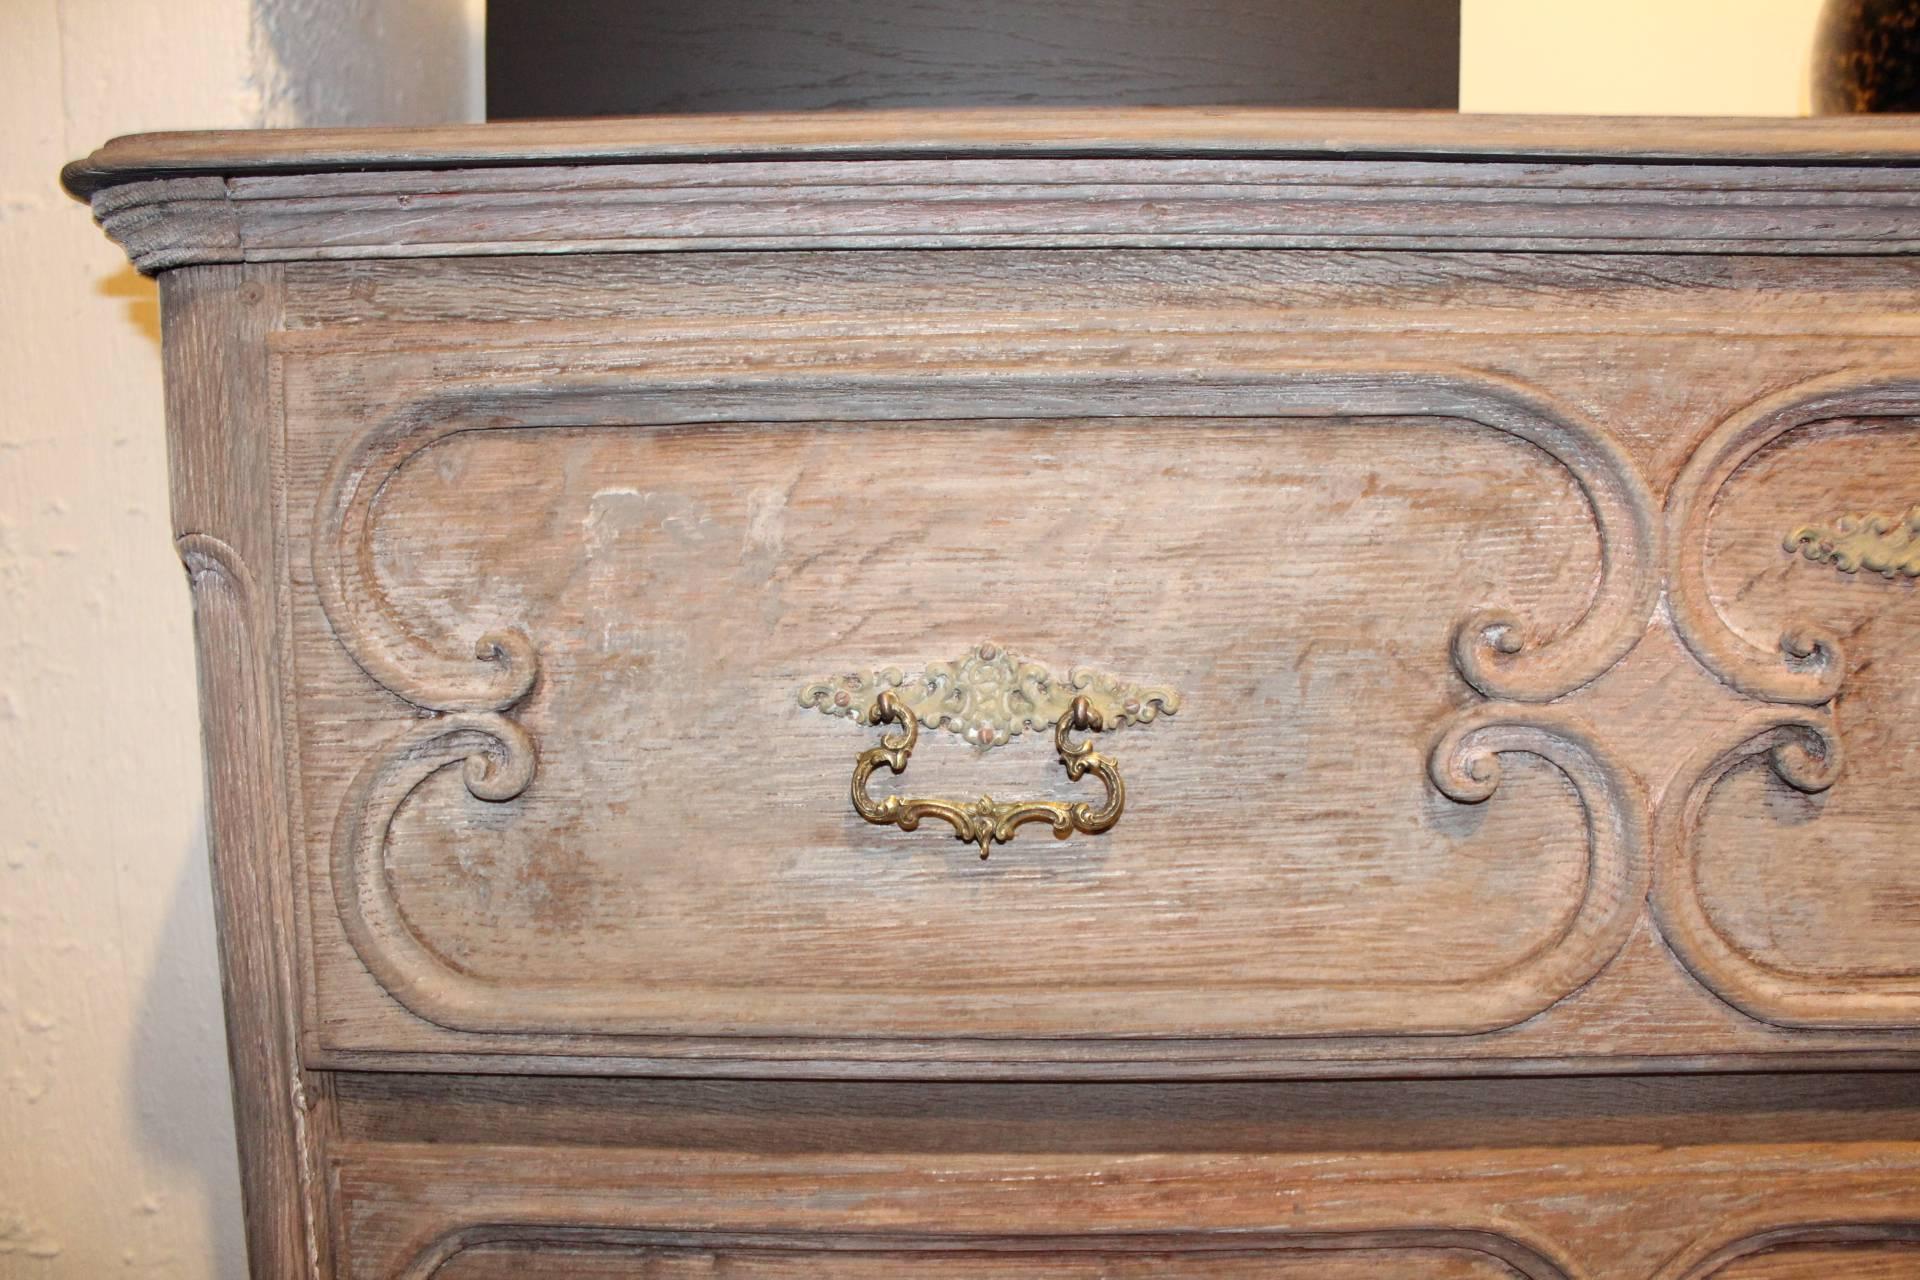 Nice detailled Antique carved commood in Fine Oak with a beautifull painted patina.
In perfect condition and made arround 1850 in the Area off Lorraine .
The original hardware is still complete.
Nice size chest off drawers with a great patina. 
